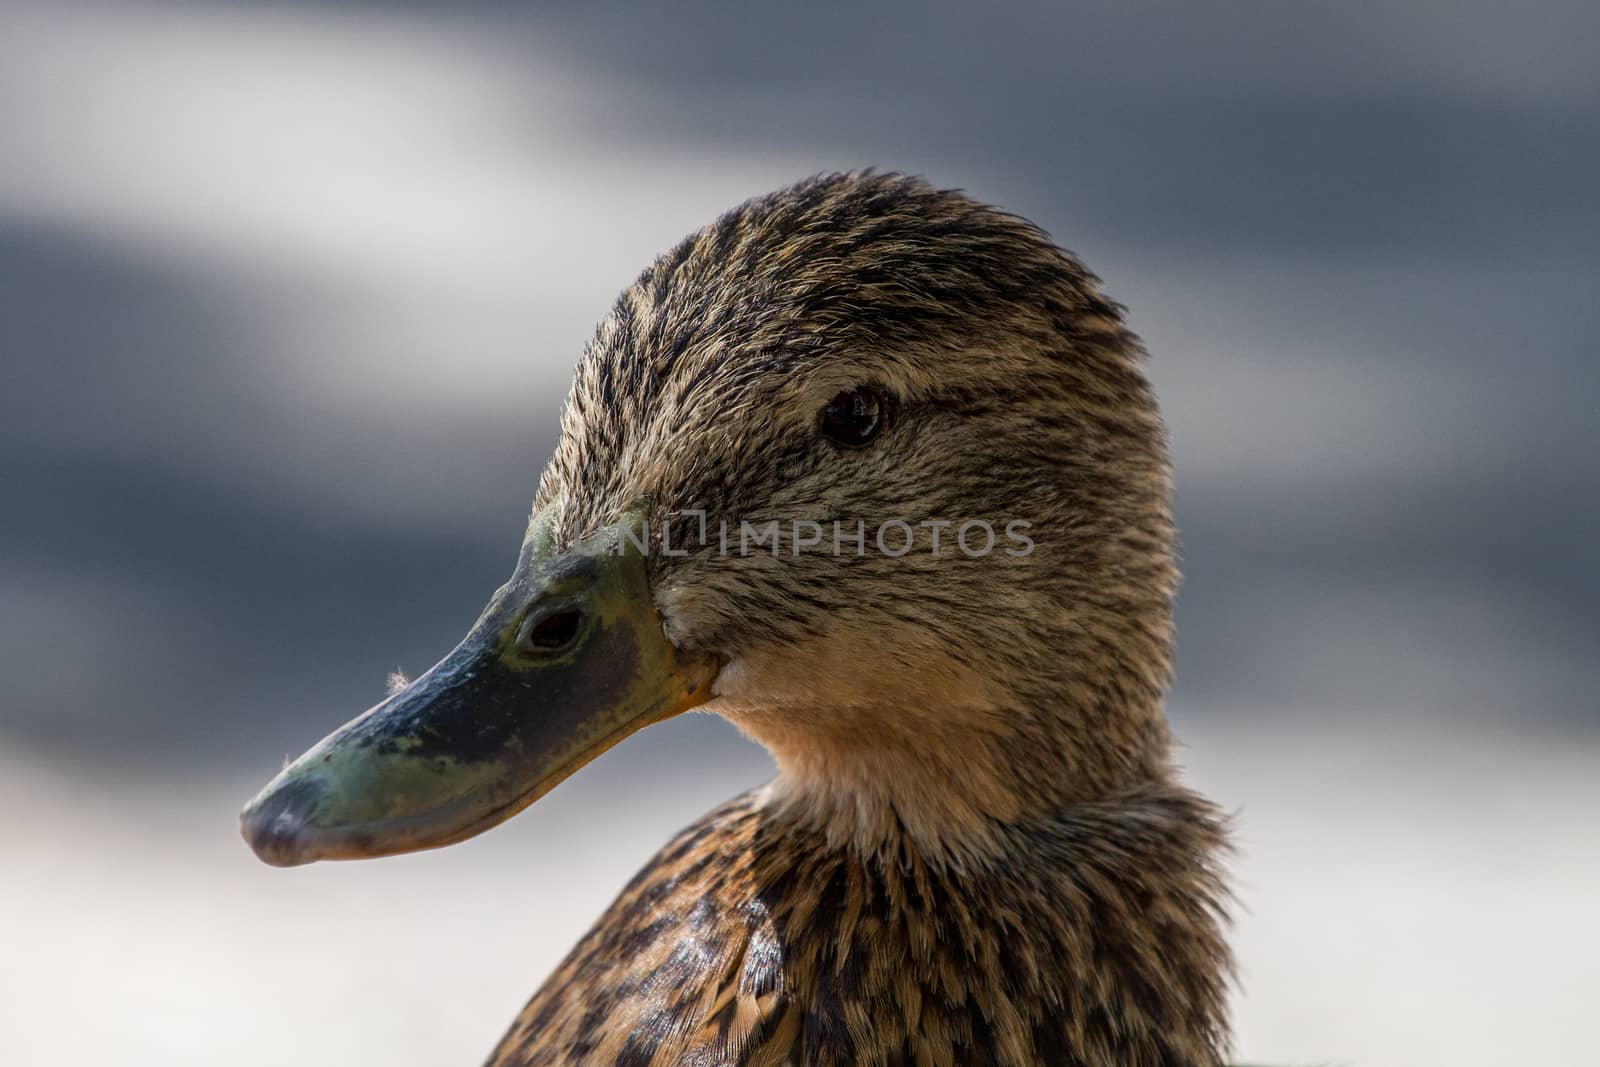 A duck profile photographed in Sesto Calende on the Maggiore lake in Italy.